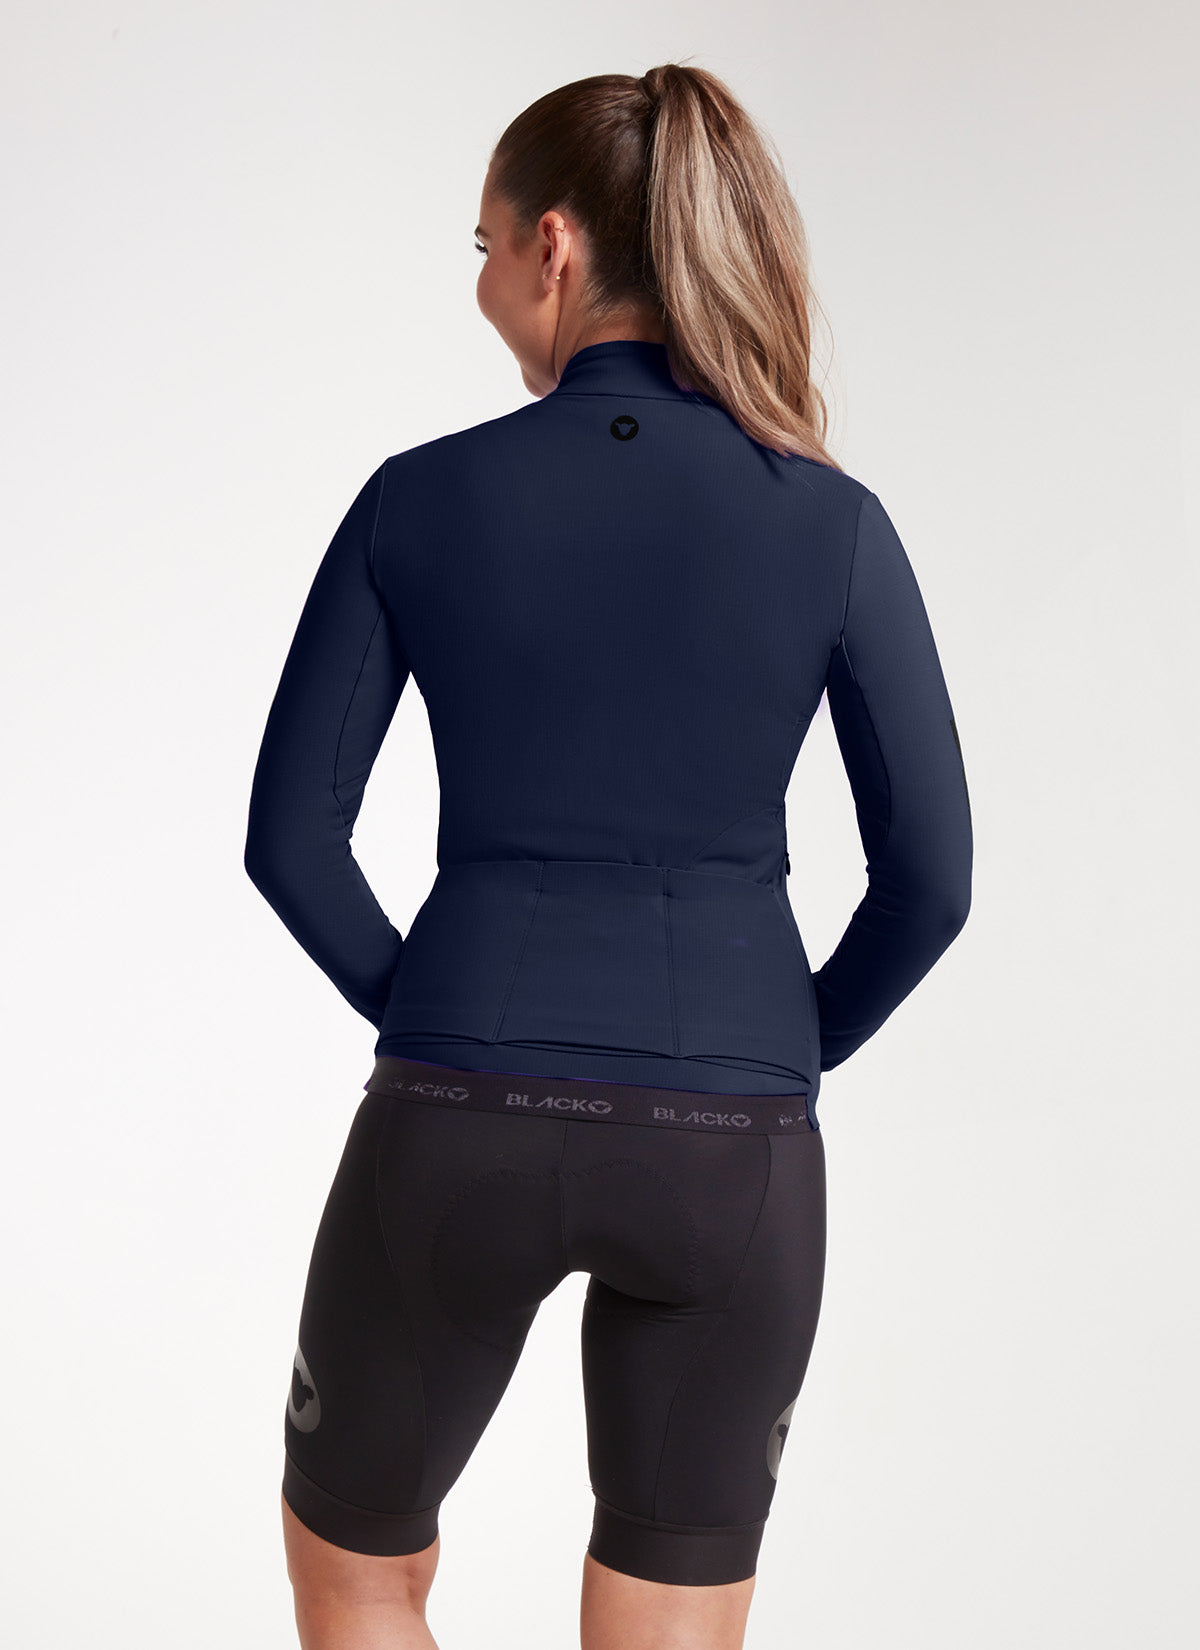 Women's Elements LS Thermal Jersey - Midnight Navy